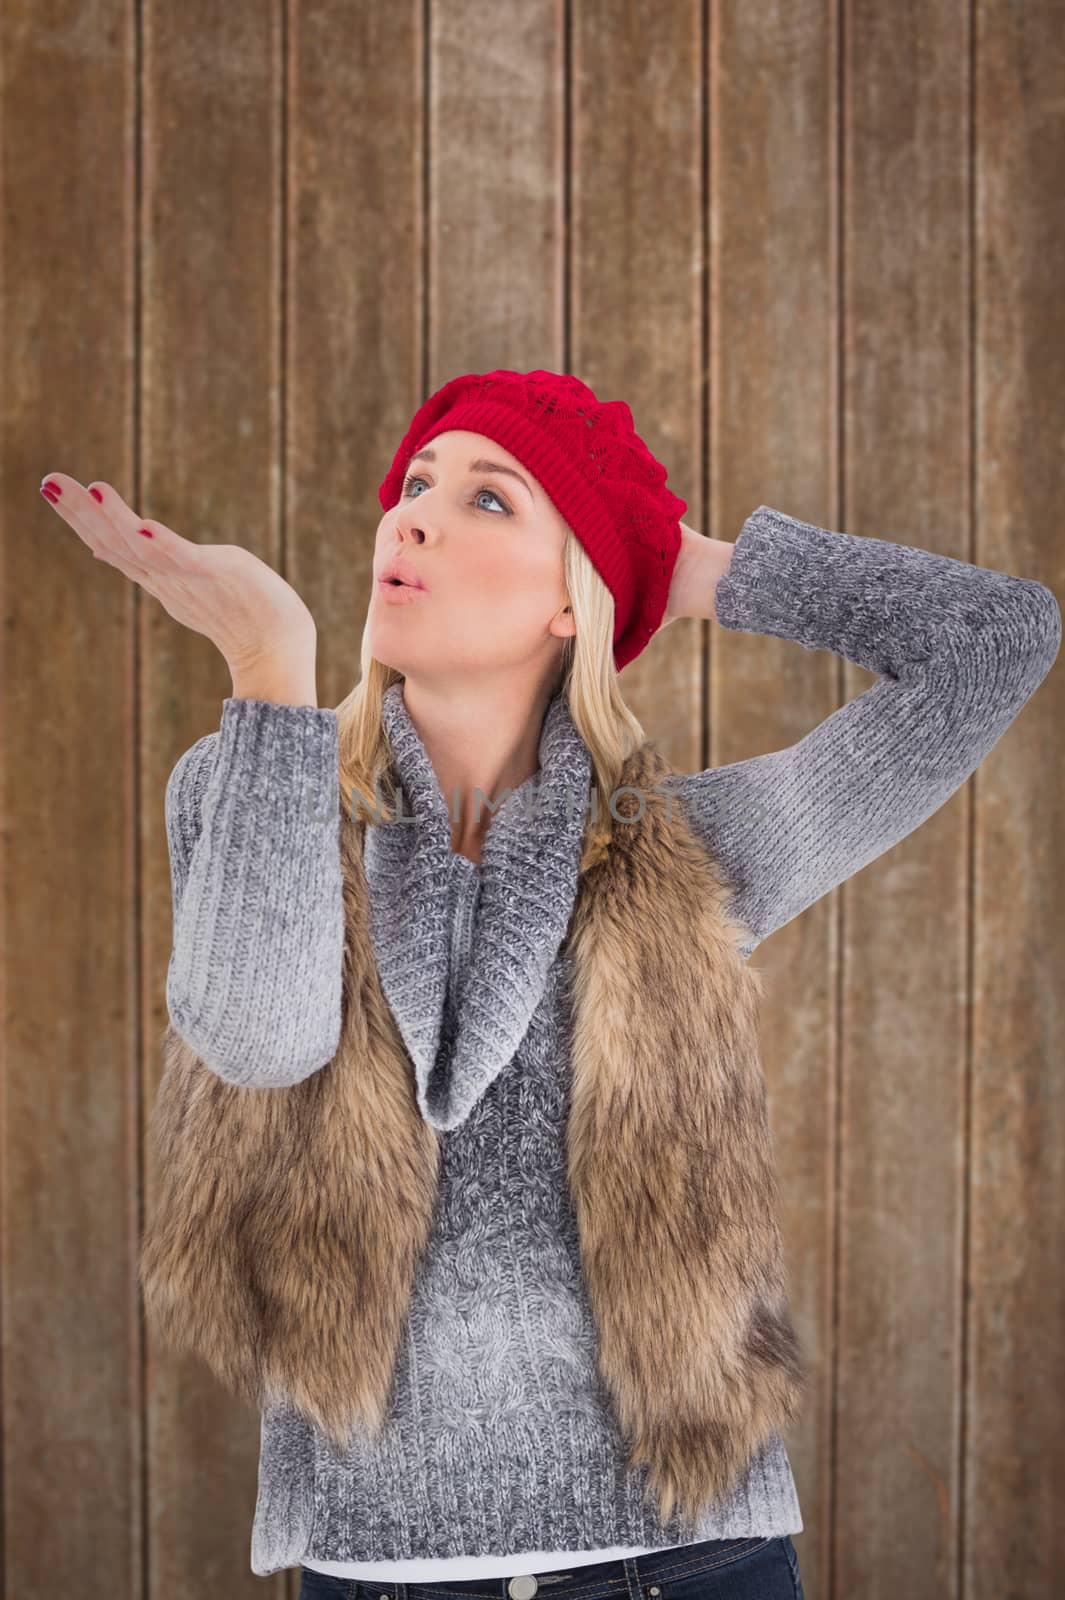 Blonde in winter clothes blowing kiss against wooden planks background